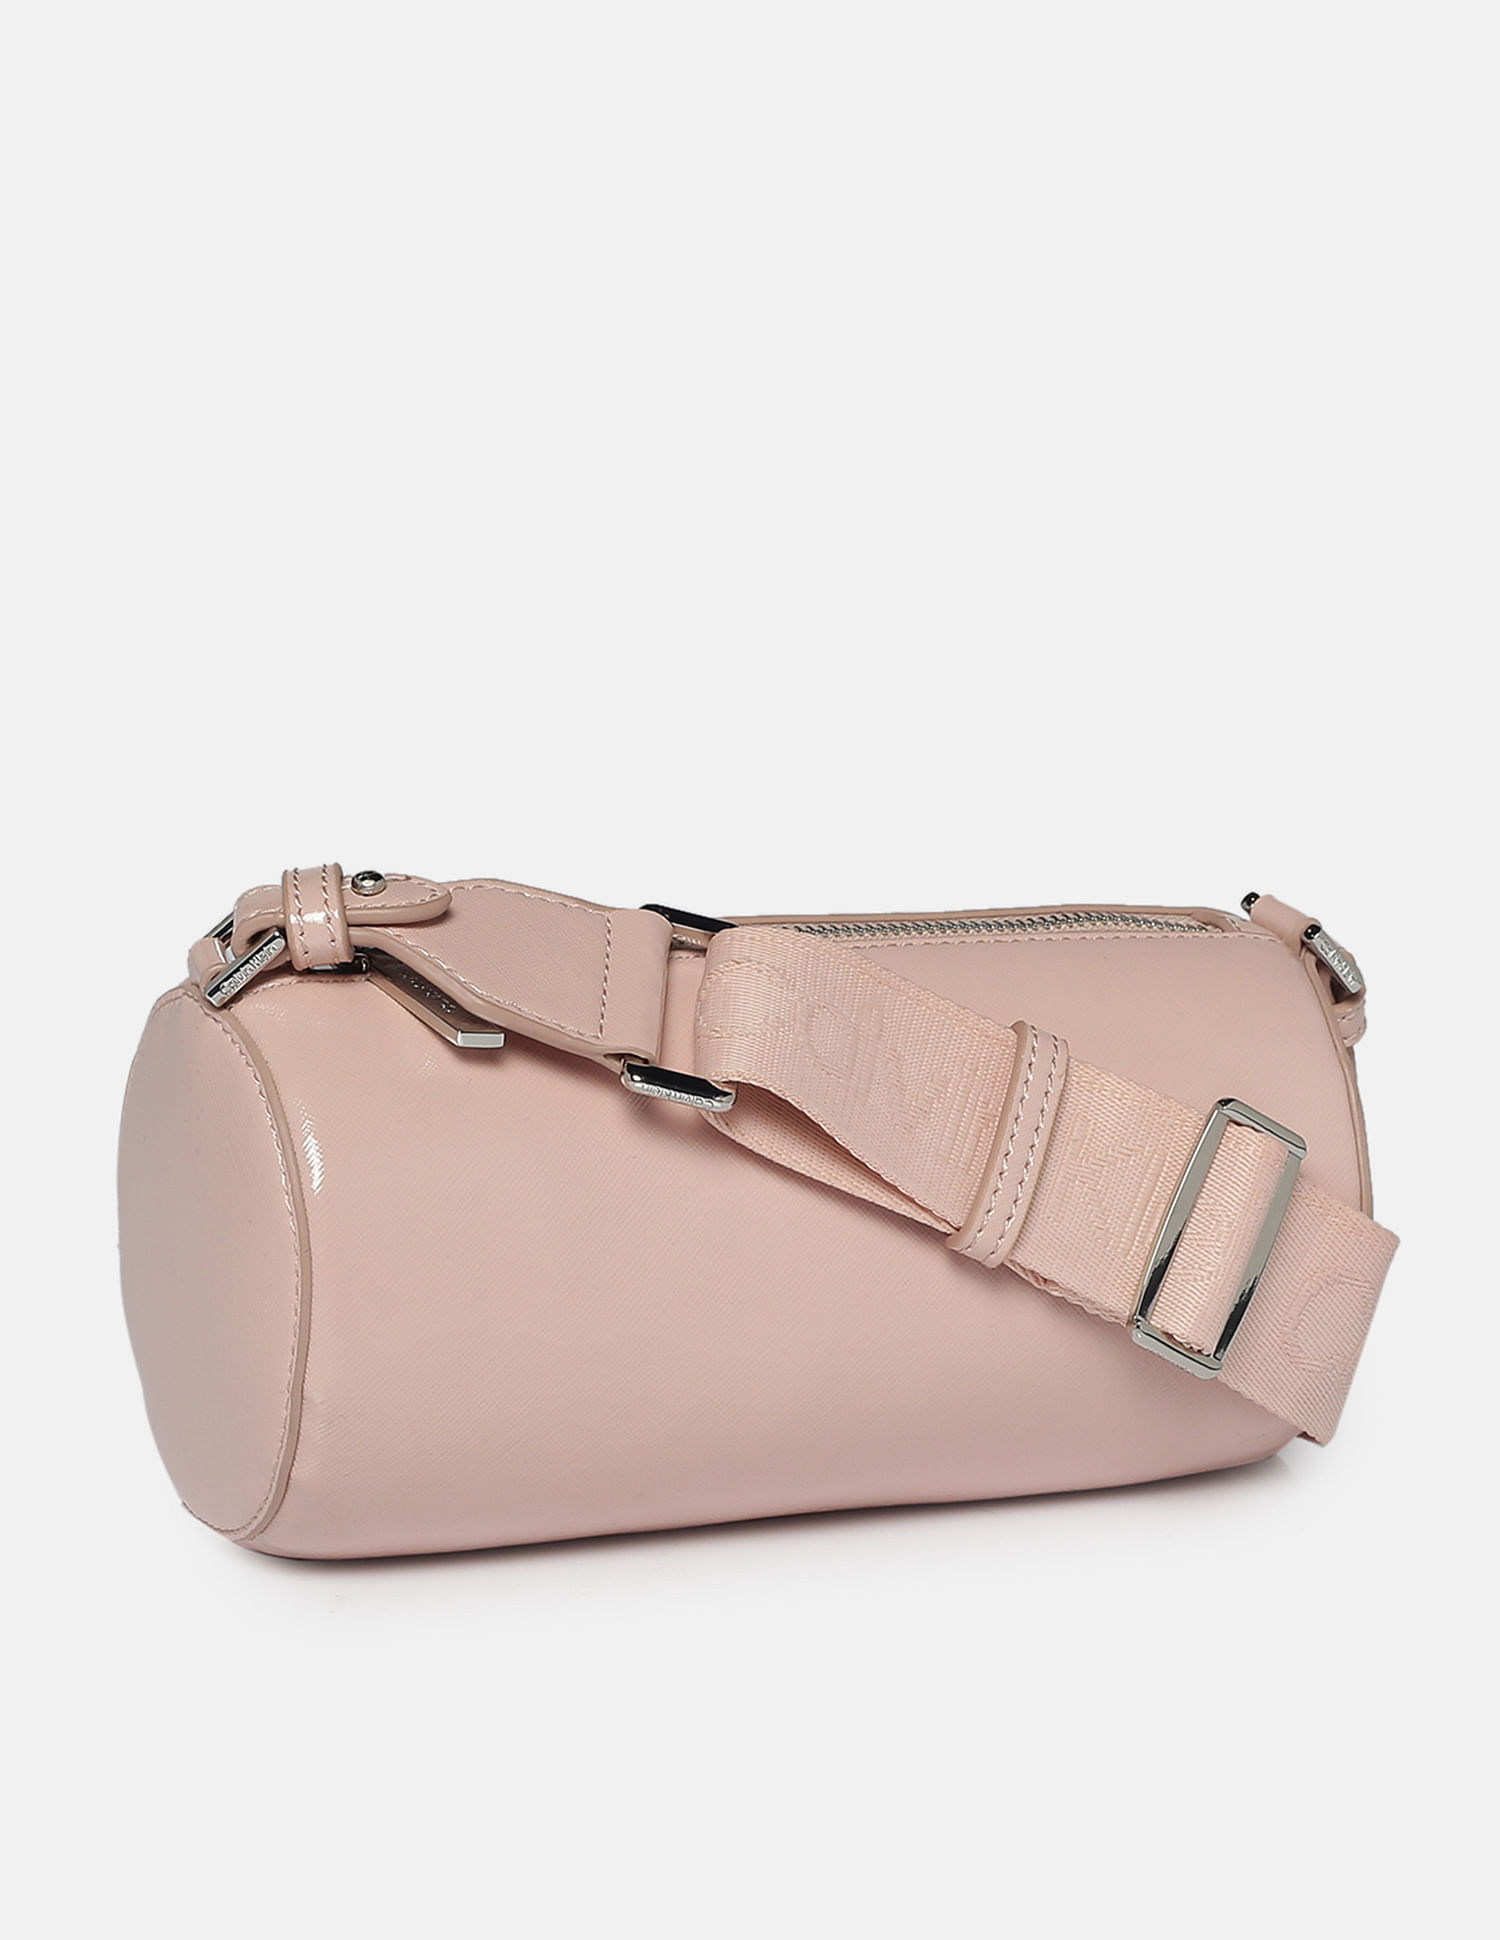 Mini Cylinder Bag in Pink Leather